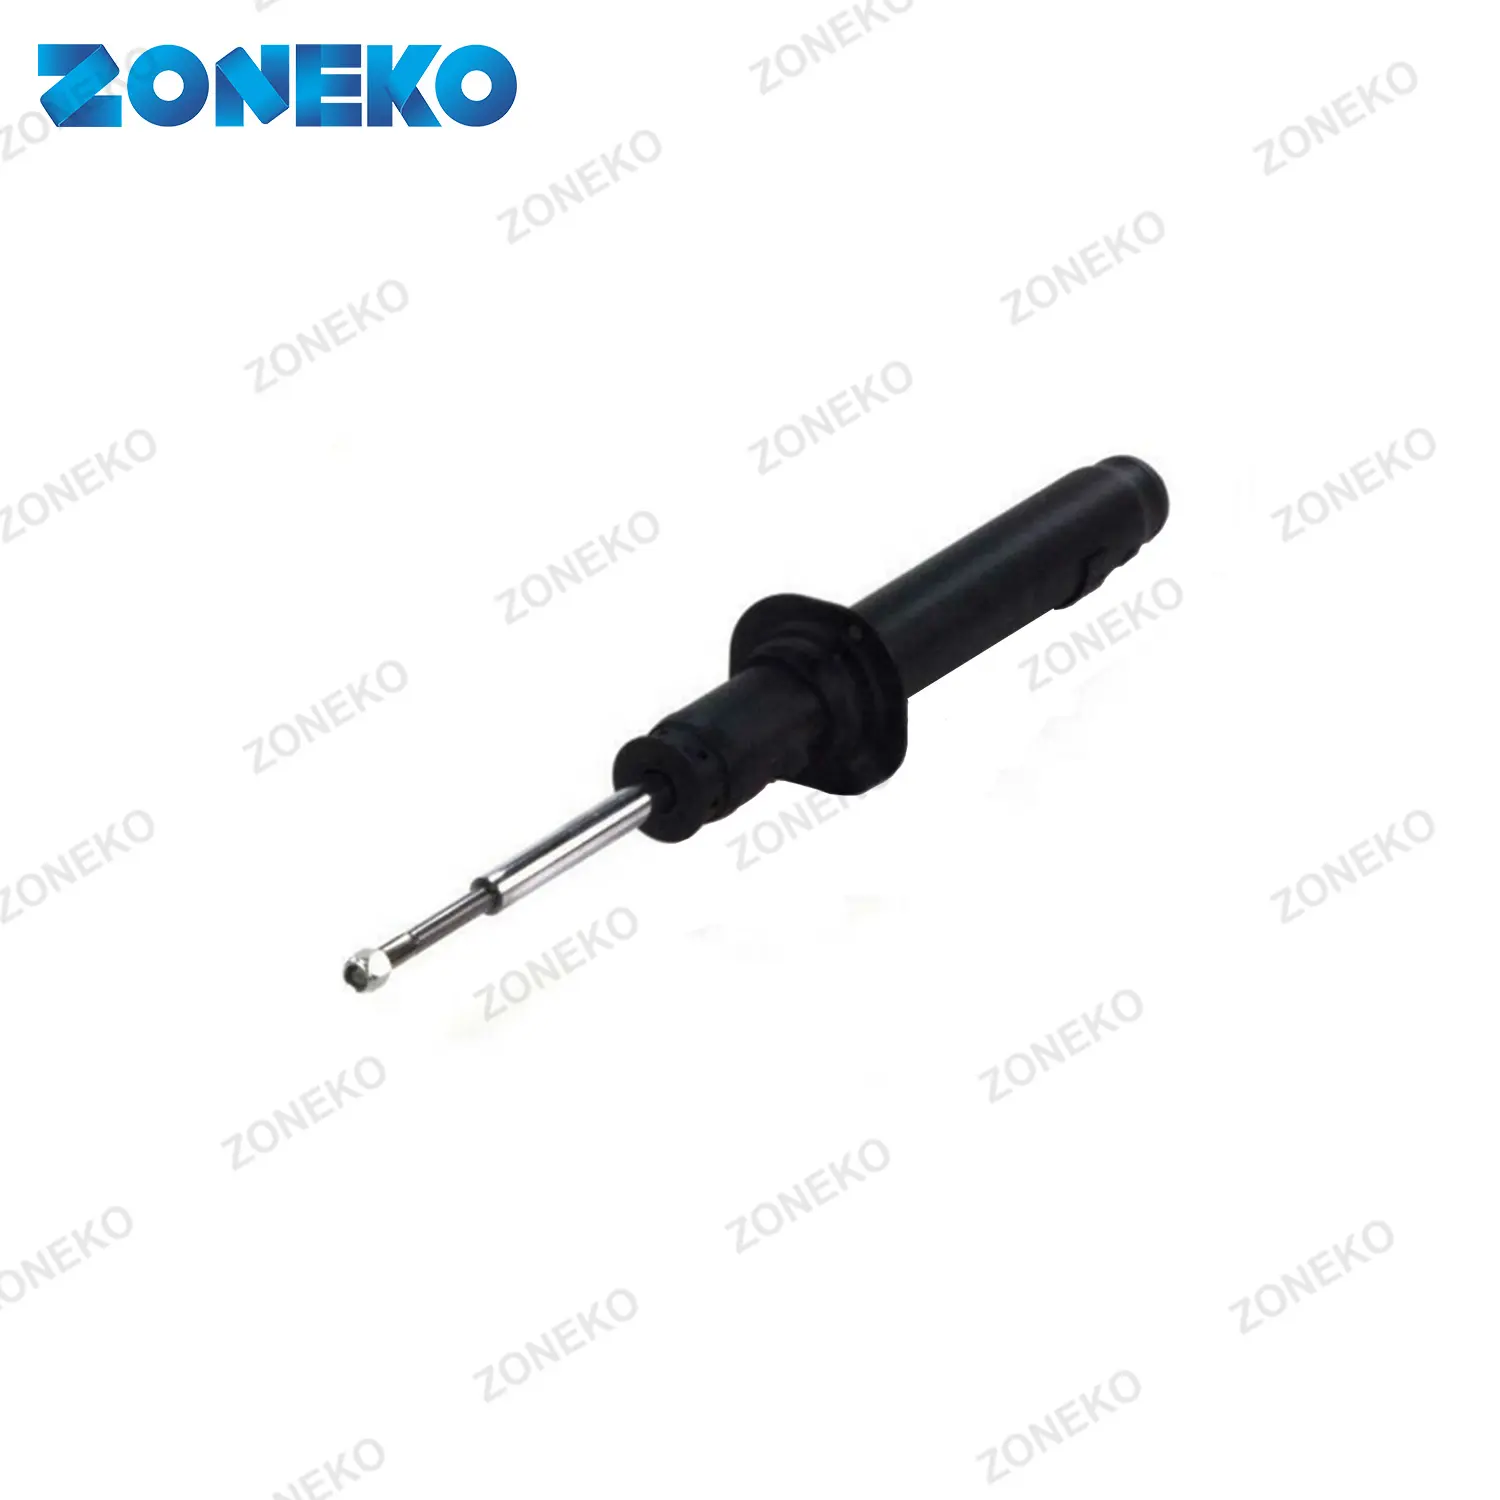 Guangzhou ZONEKO high quality Auto parts wholesale factory shock absorber 55311 38400 for SONATA